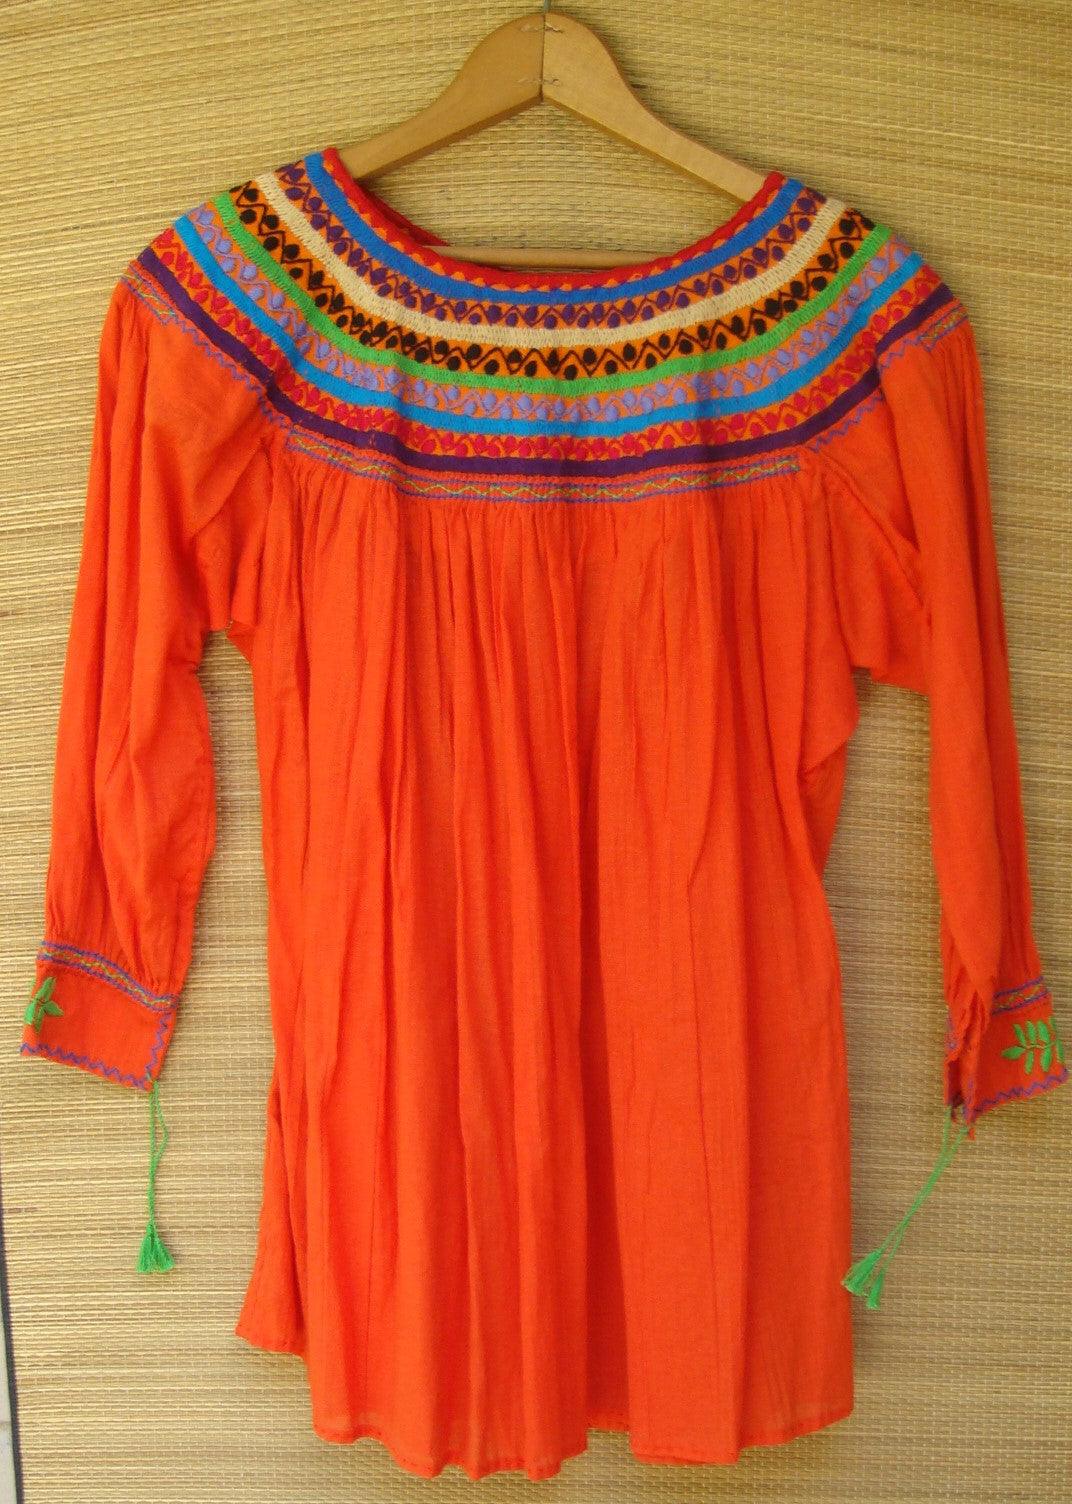 Mexican Blouse Huipil Orange with Beige Embroidery Small/Medium